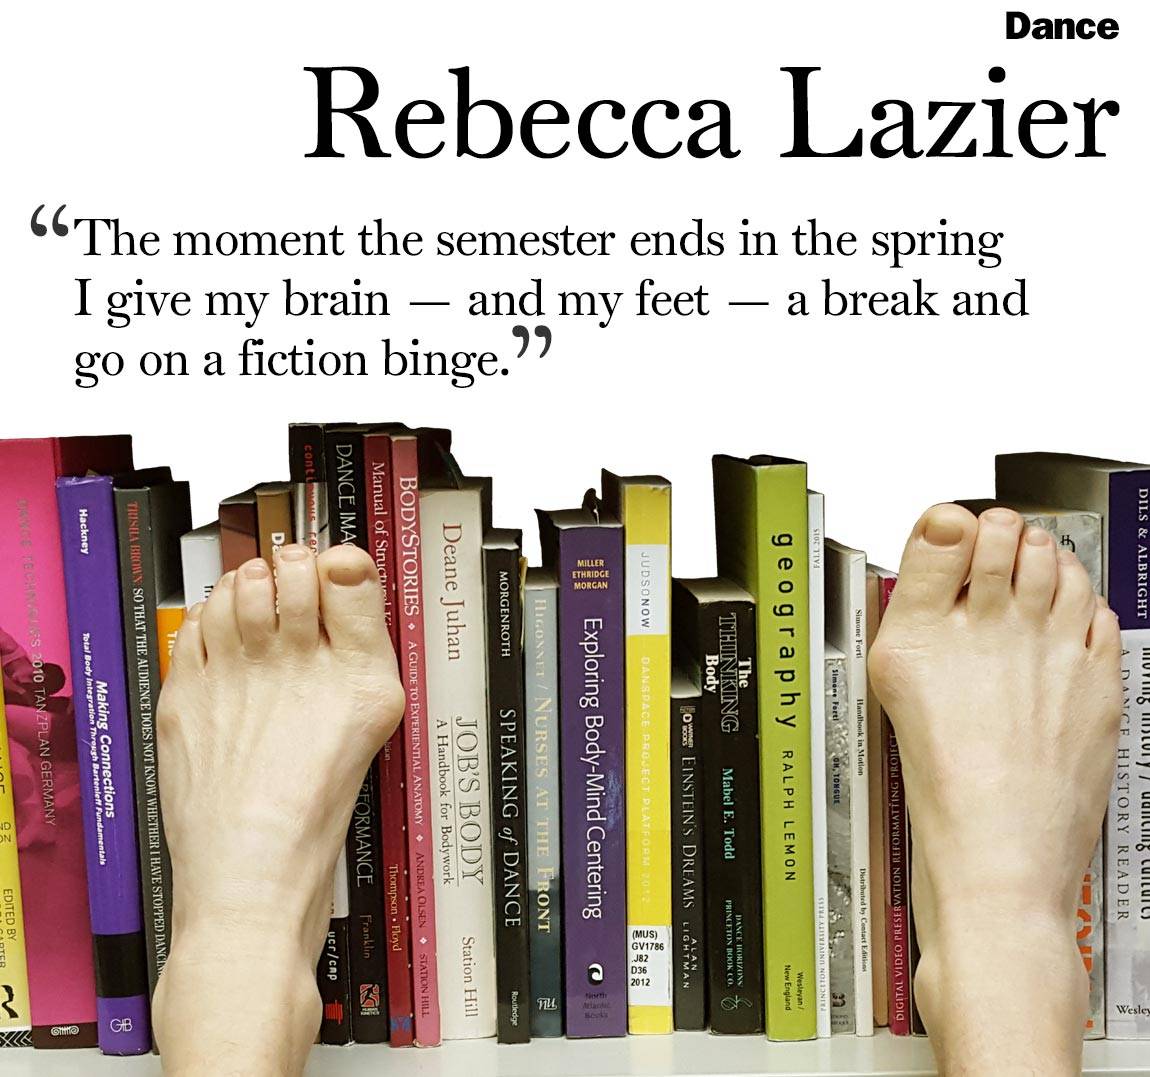 Faculty Bookshelves 2016 “Dance; Rebecca Lazier; ‘The moment the semester ends in the spring I give my brain — and my feet — a break and go on a fiction binge.’”